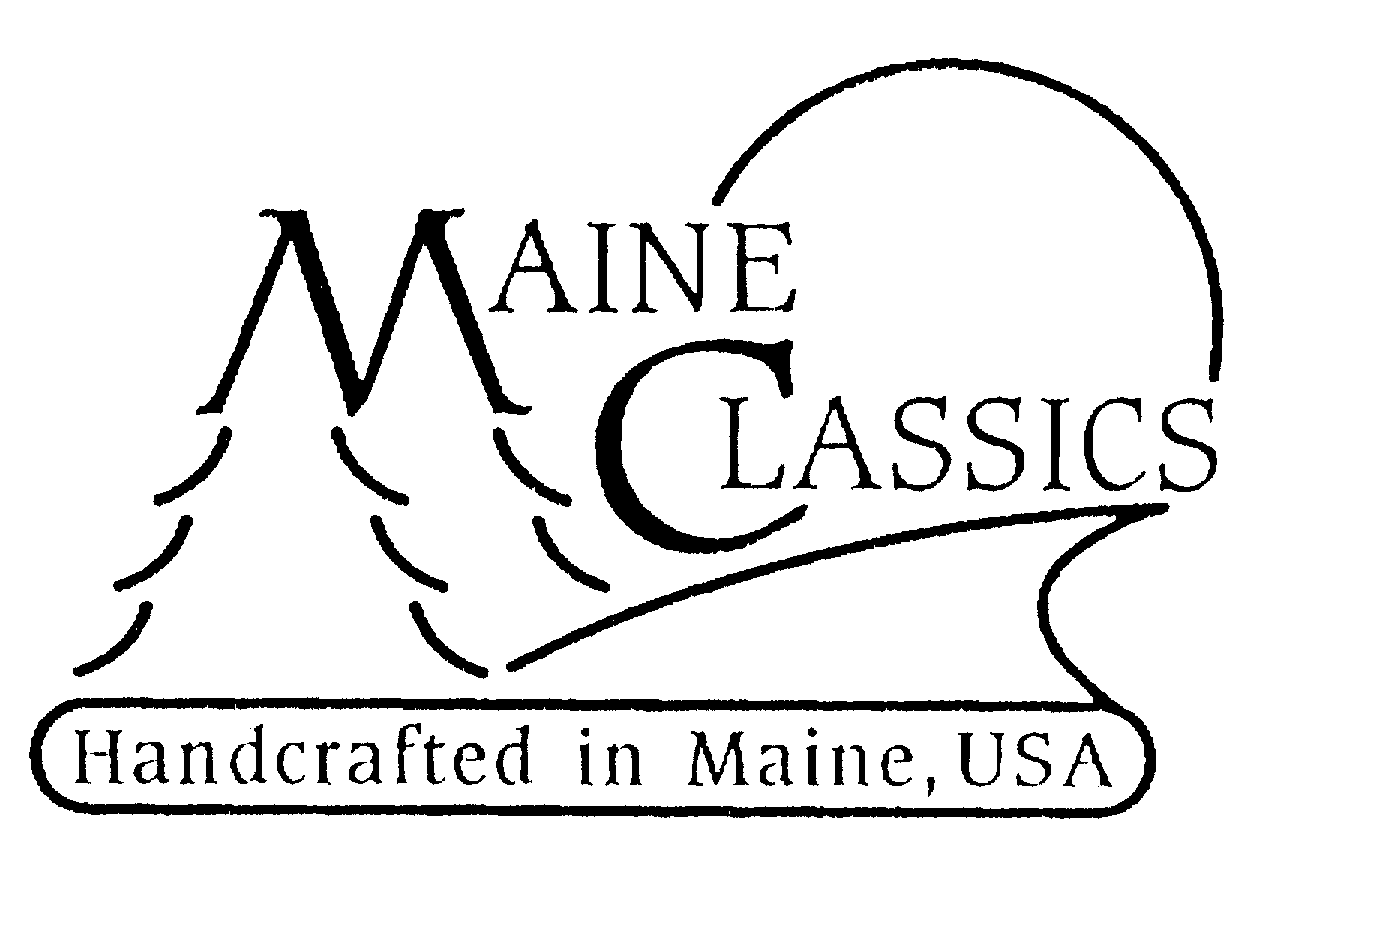  MAINE CLASSICS HANDCRAFTED IN MAINE, USA